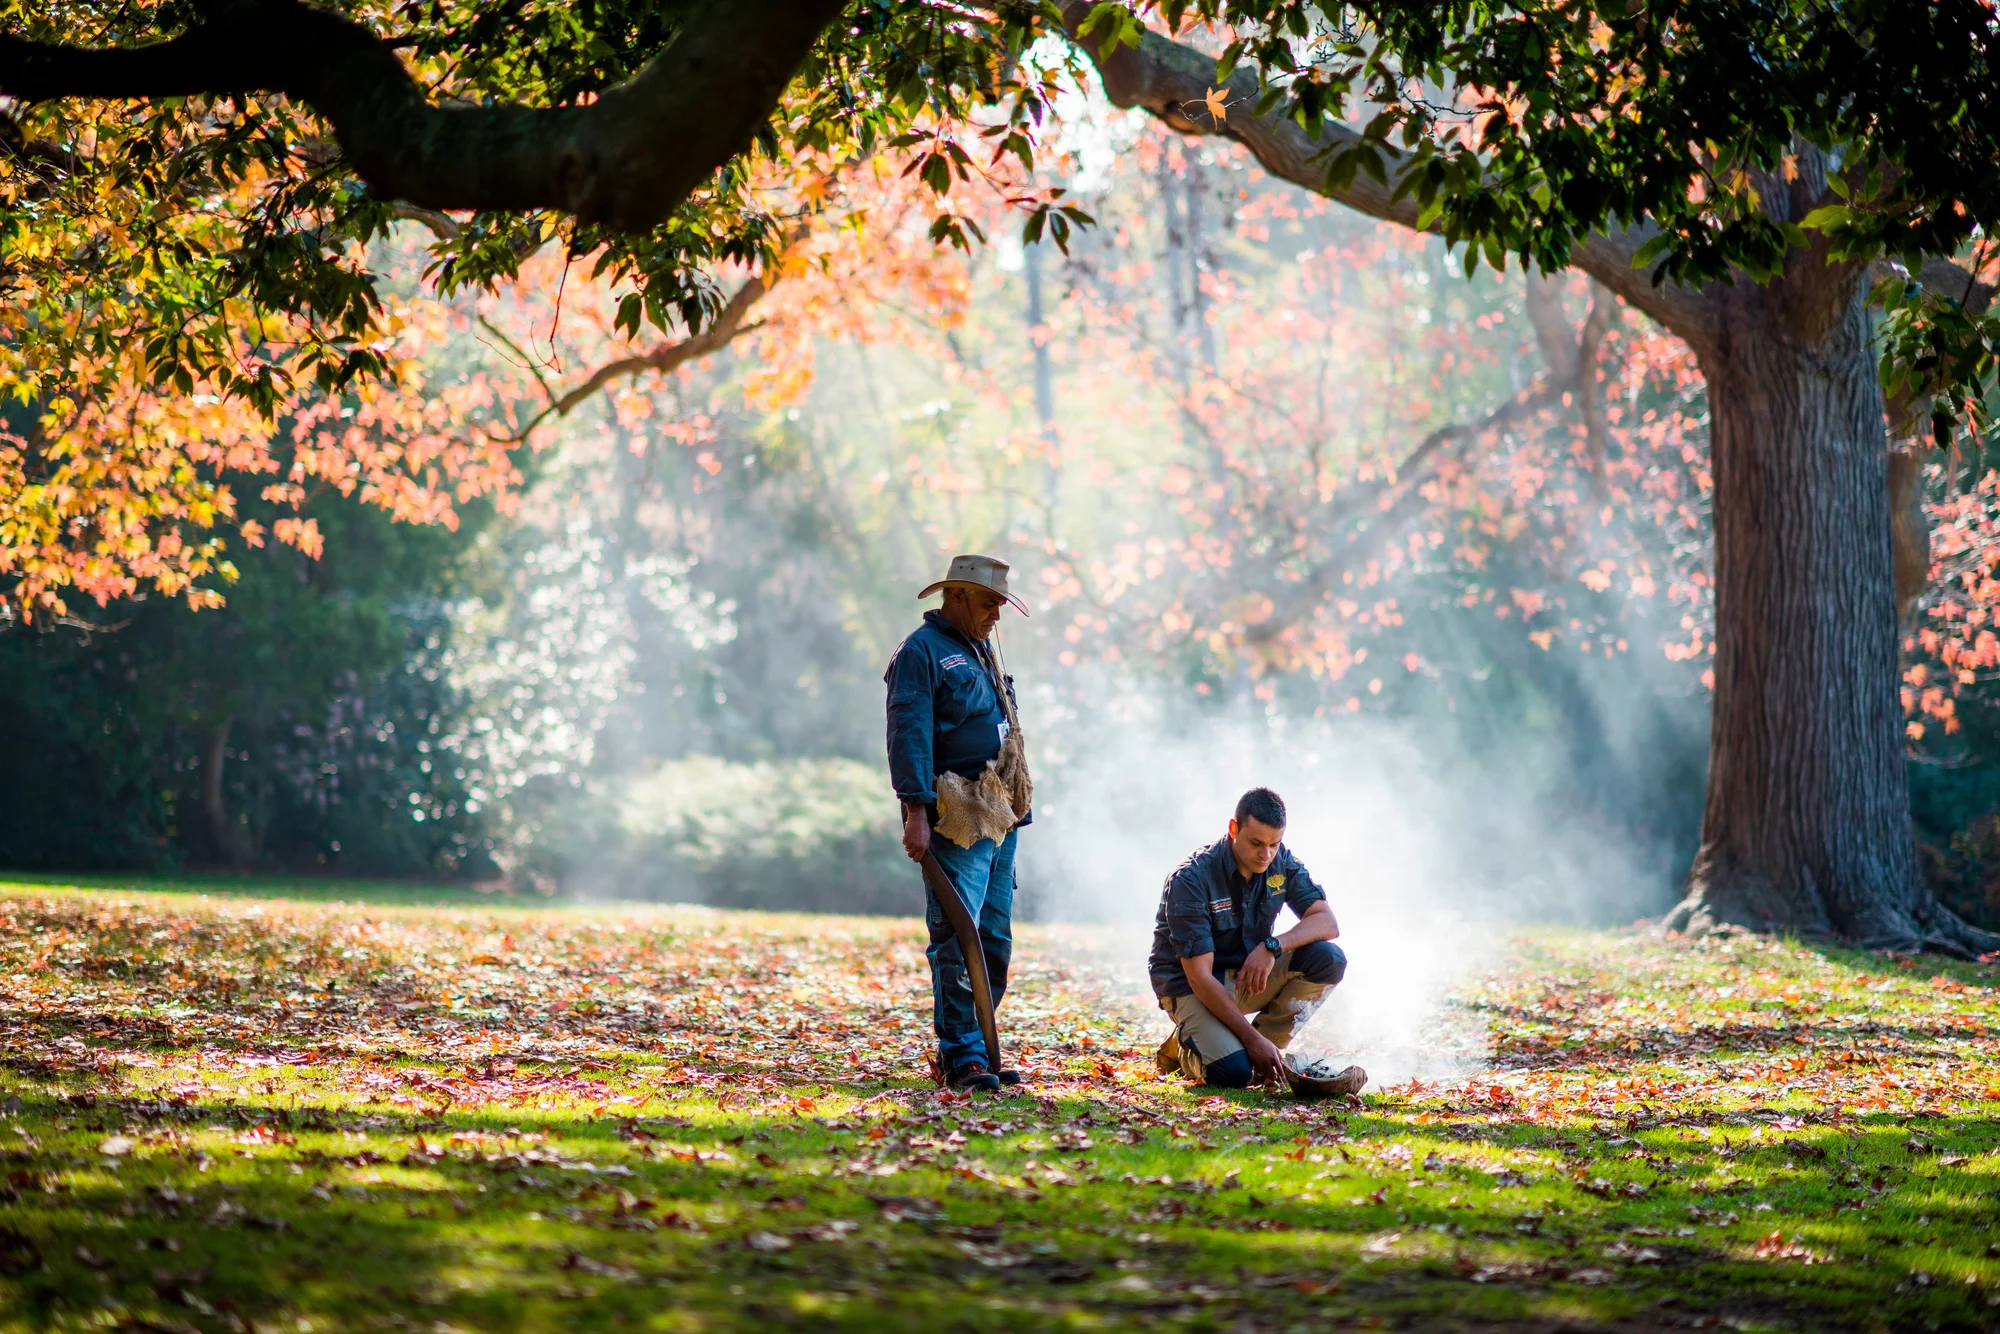 First Nations Cultural Guides performing a smoking ceremony in the Eastern Kulin Nation at Aboriginal Heritage Walk, Royal Botanic Gardens, Melbourne